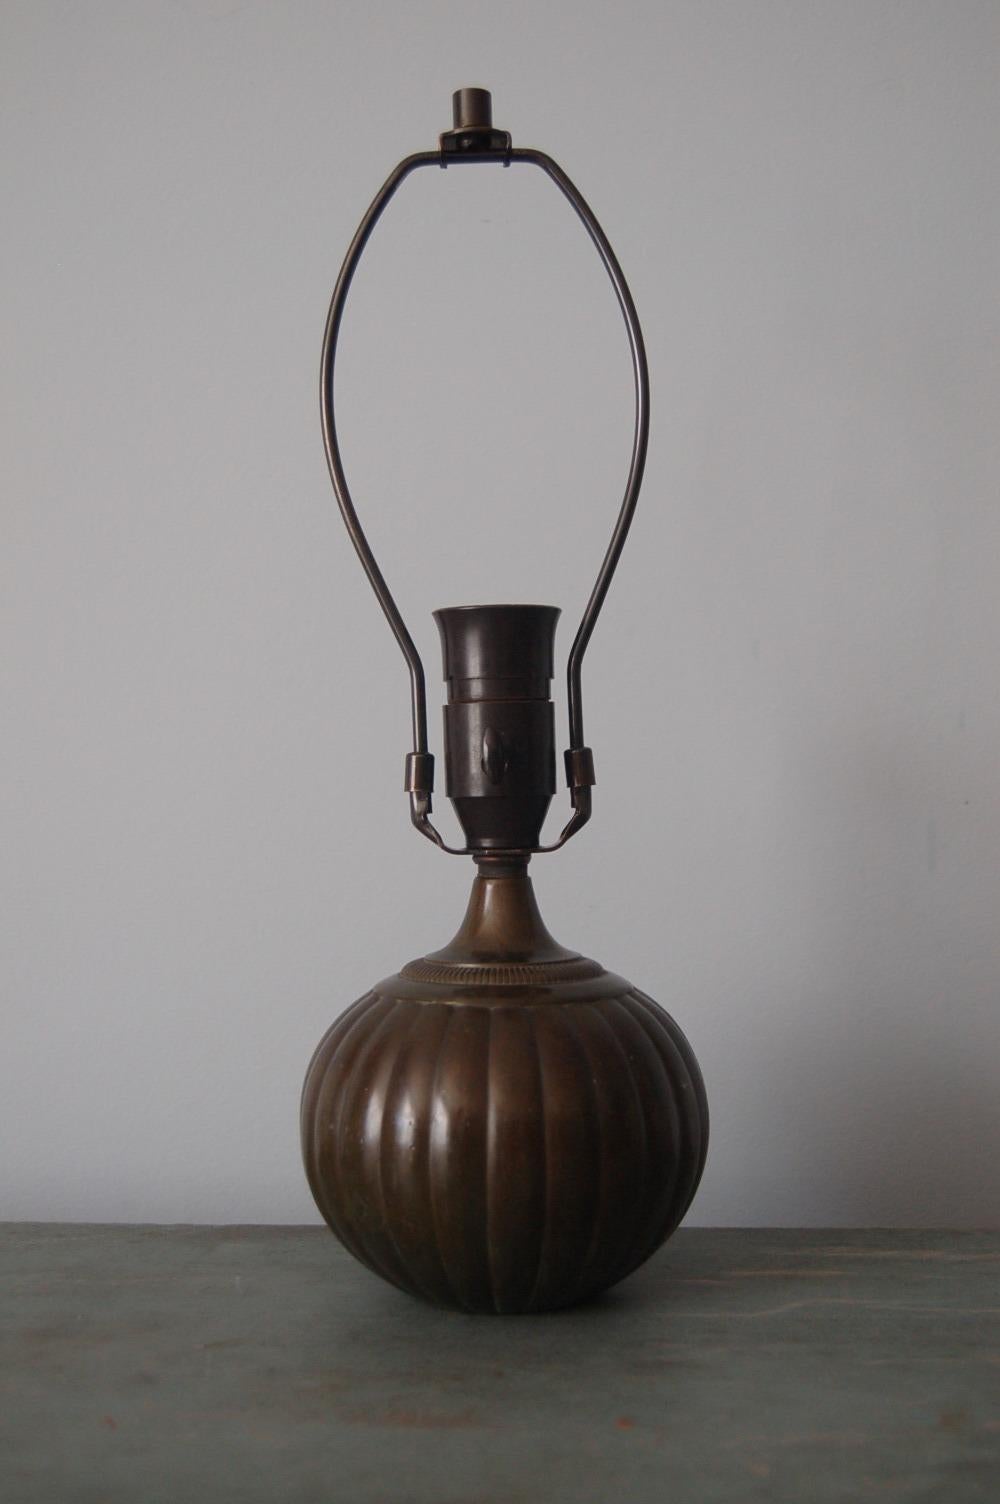 Just Andersen (1884 Qeqertarsuaq, Greenland- Glostrup, Denmark 1943), table light, stamped JUST monogram/1633, Danish, Disko-metal, circa 1930

Just Anderson was one of Denmarks greatest designers. Born in Greenland, he moved to Denmark as a